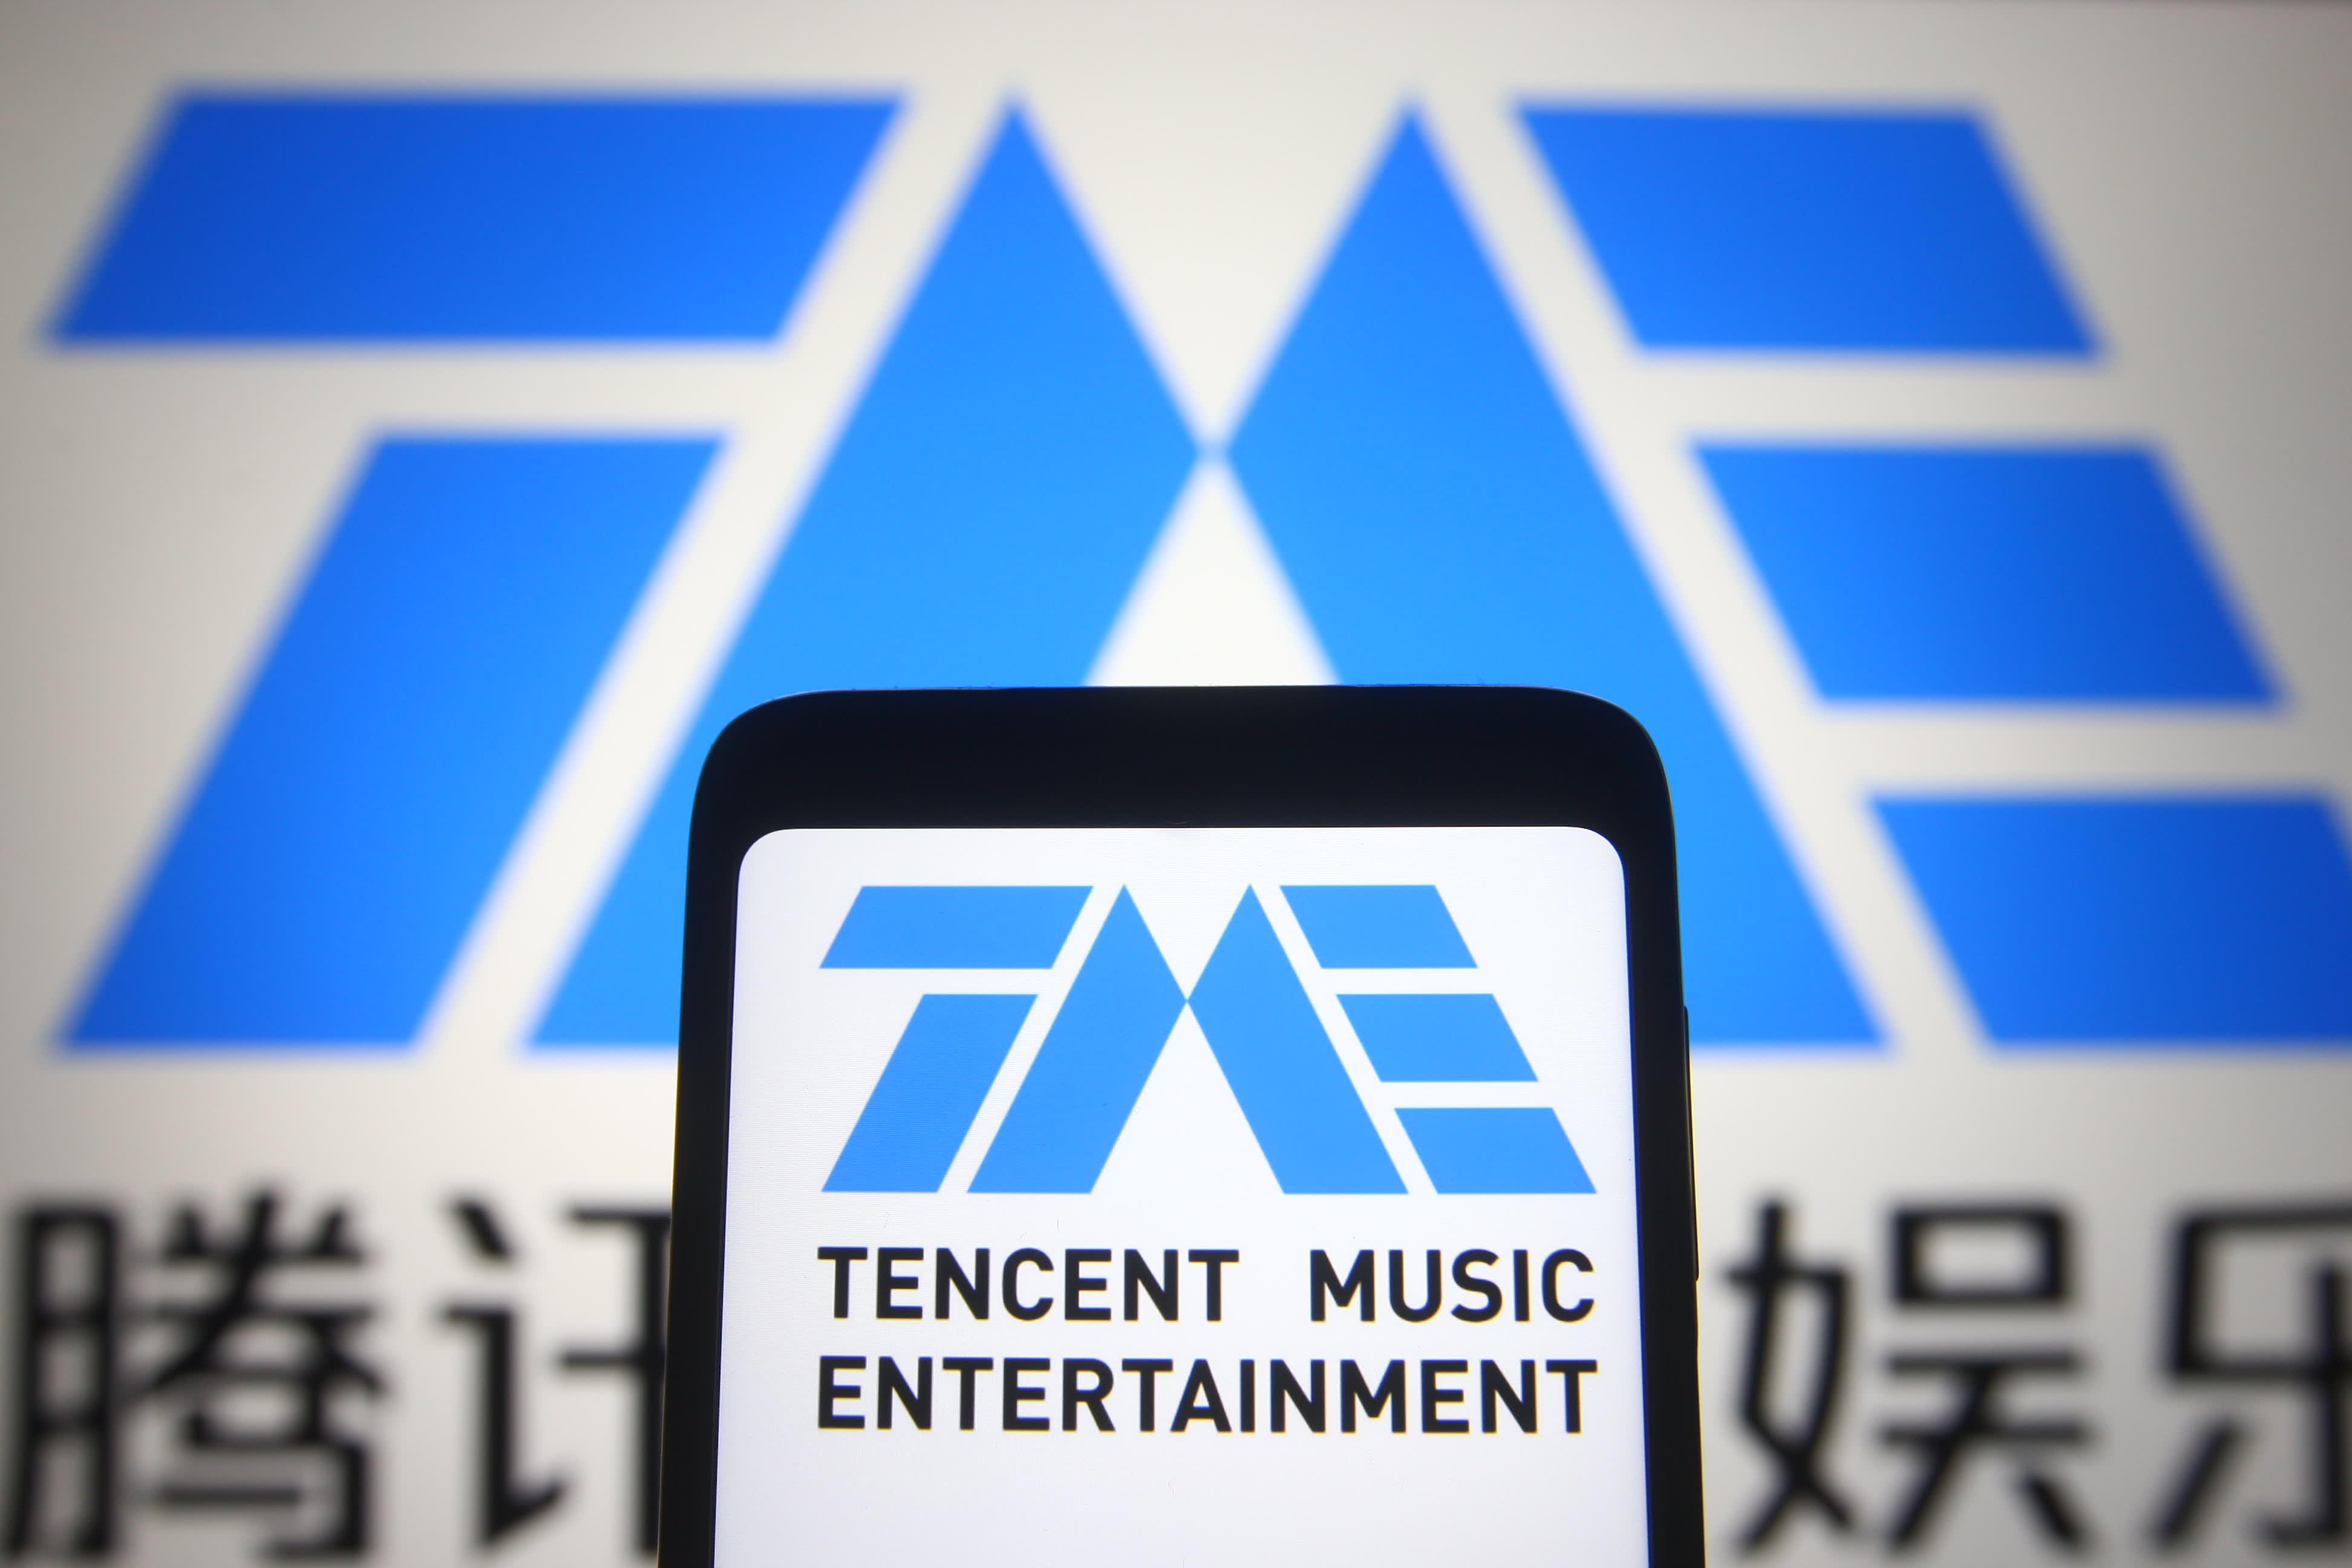 China's antitrust authorities order Tencent Music to end its exclusive music licensing deals with global record labels within 30 days and impose a fine of ~$77K (Joanna Tan/CNBC)